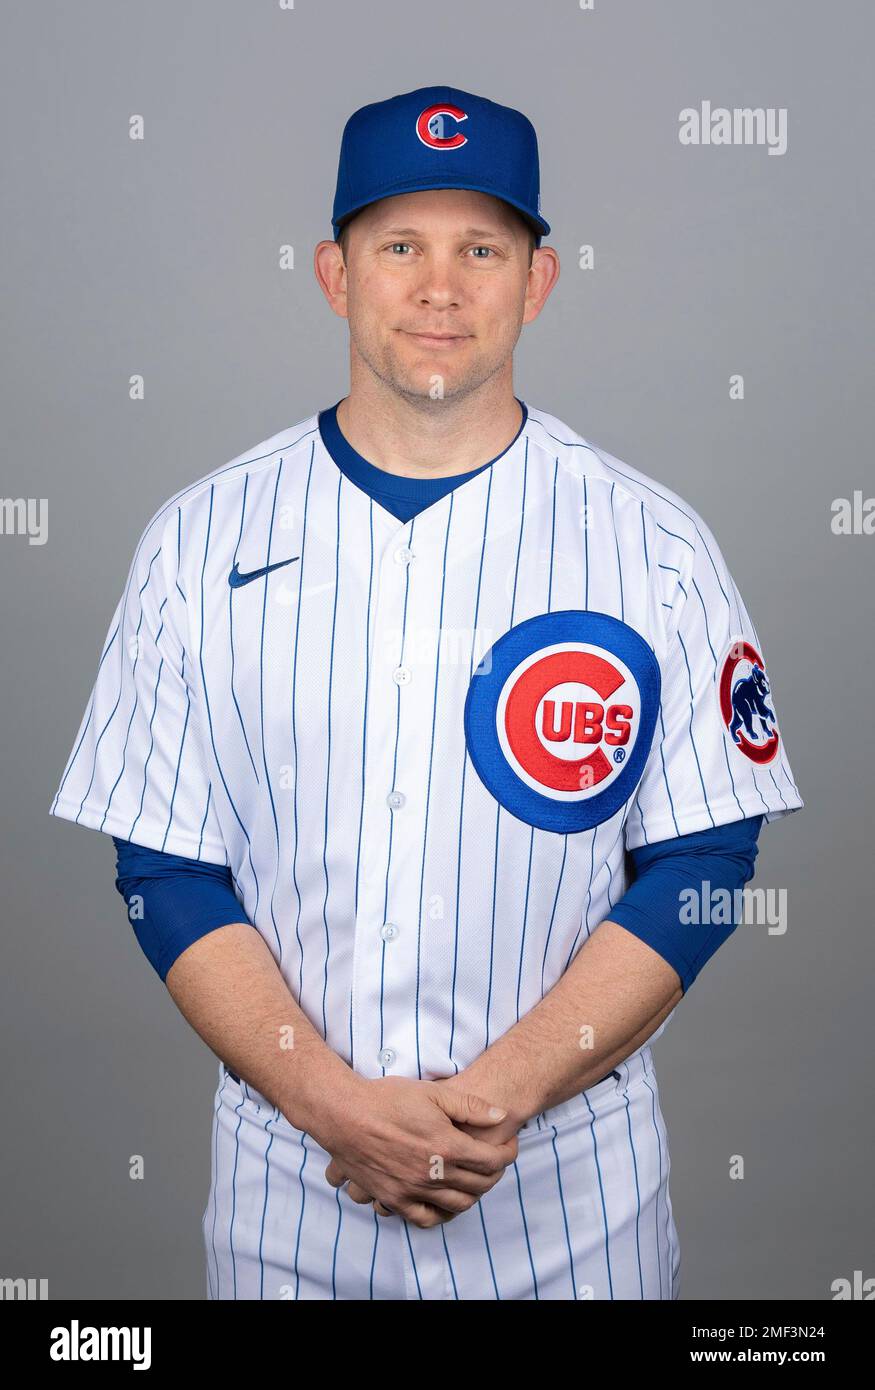 This is a 2021 photo of Andy Green of the Chicago Cubs baseball